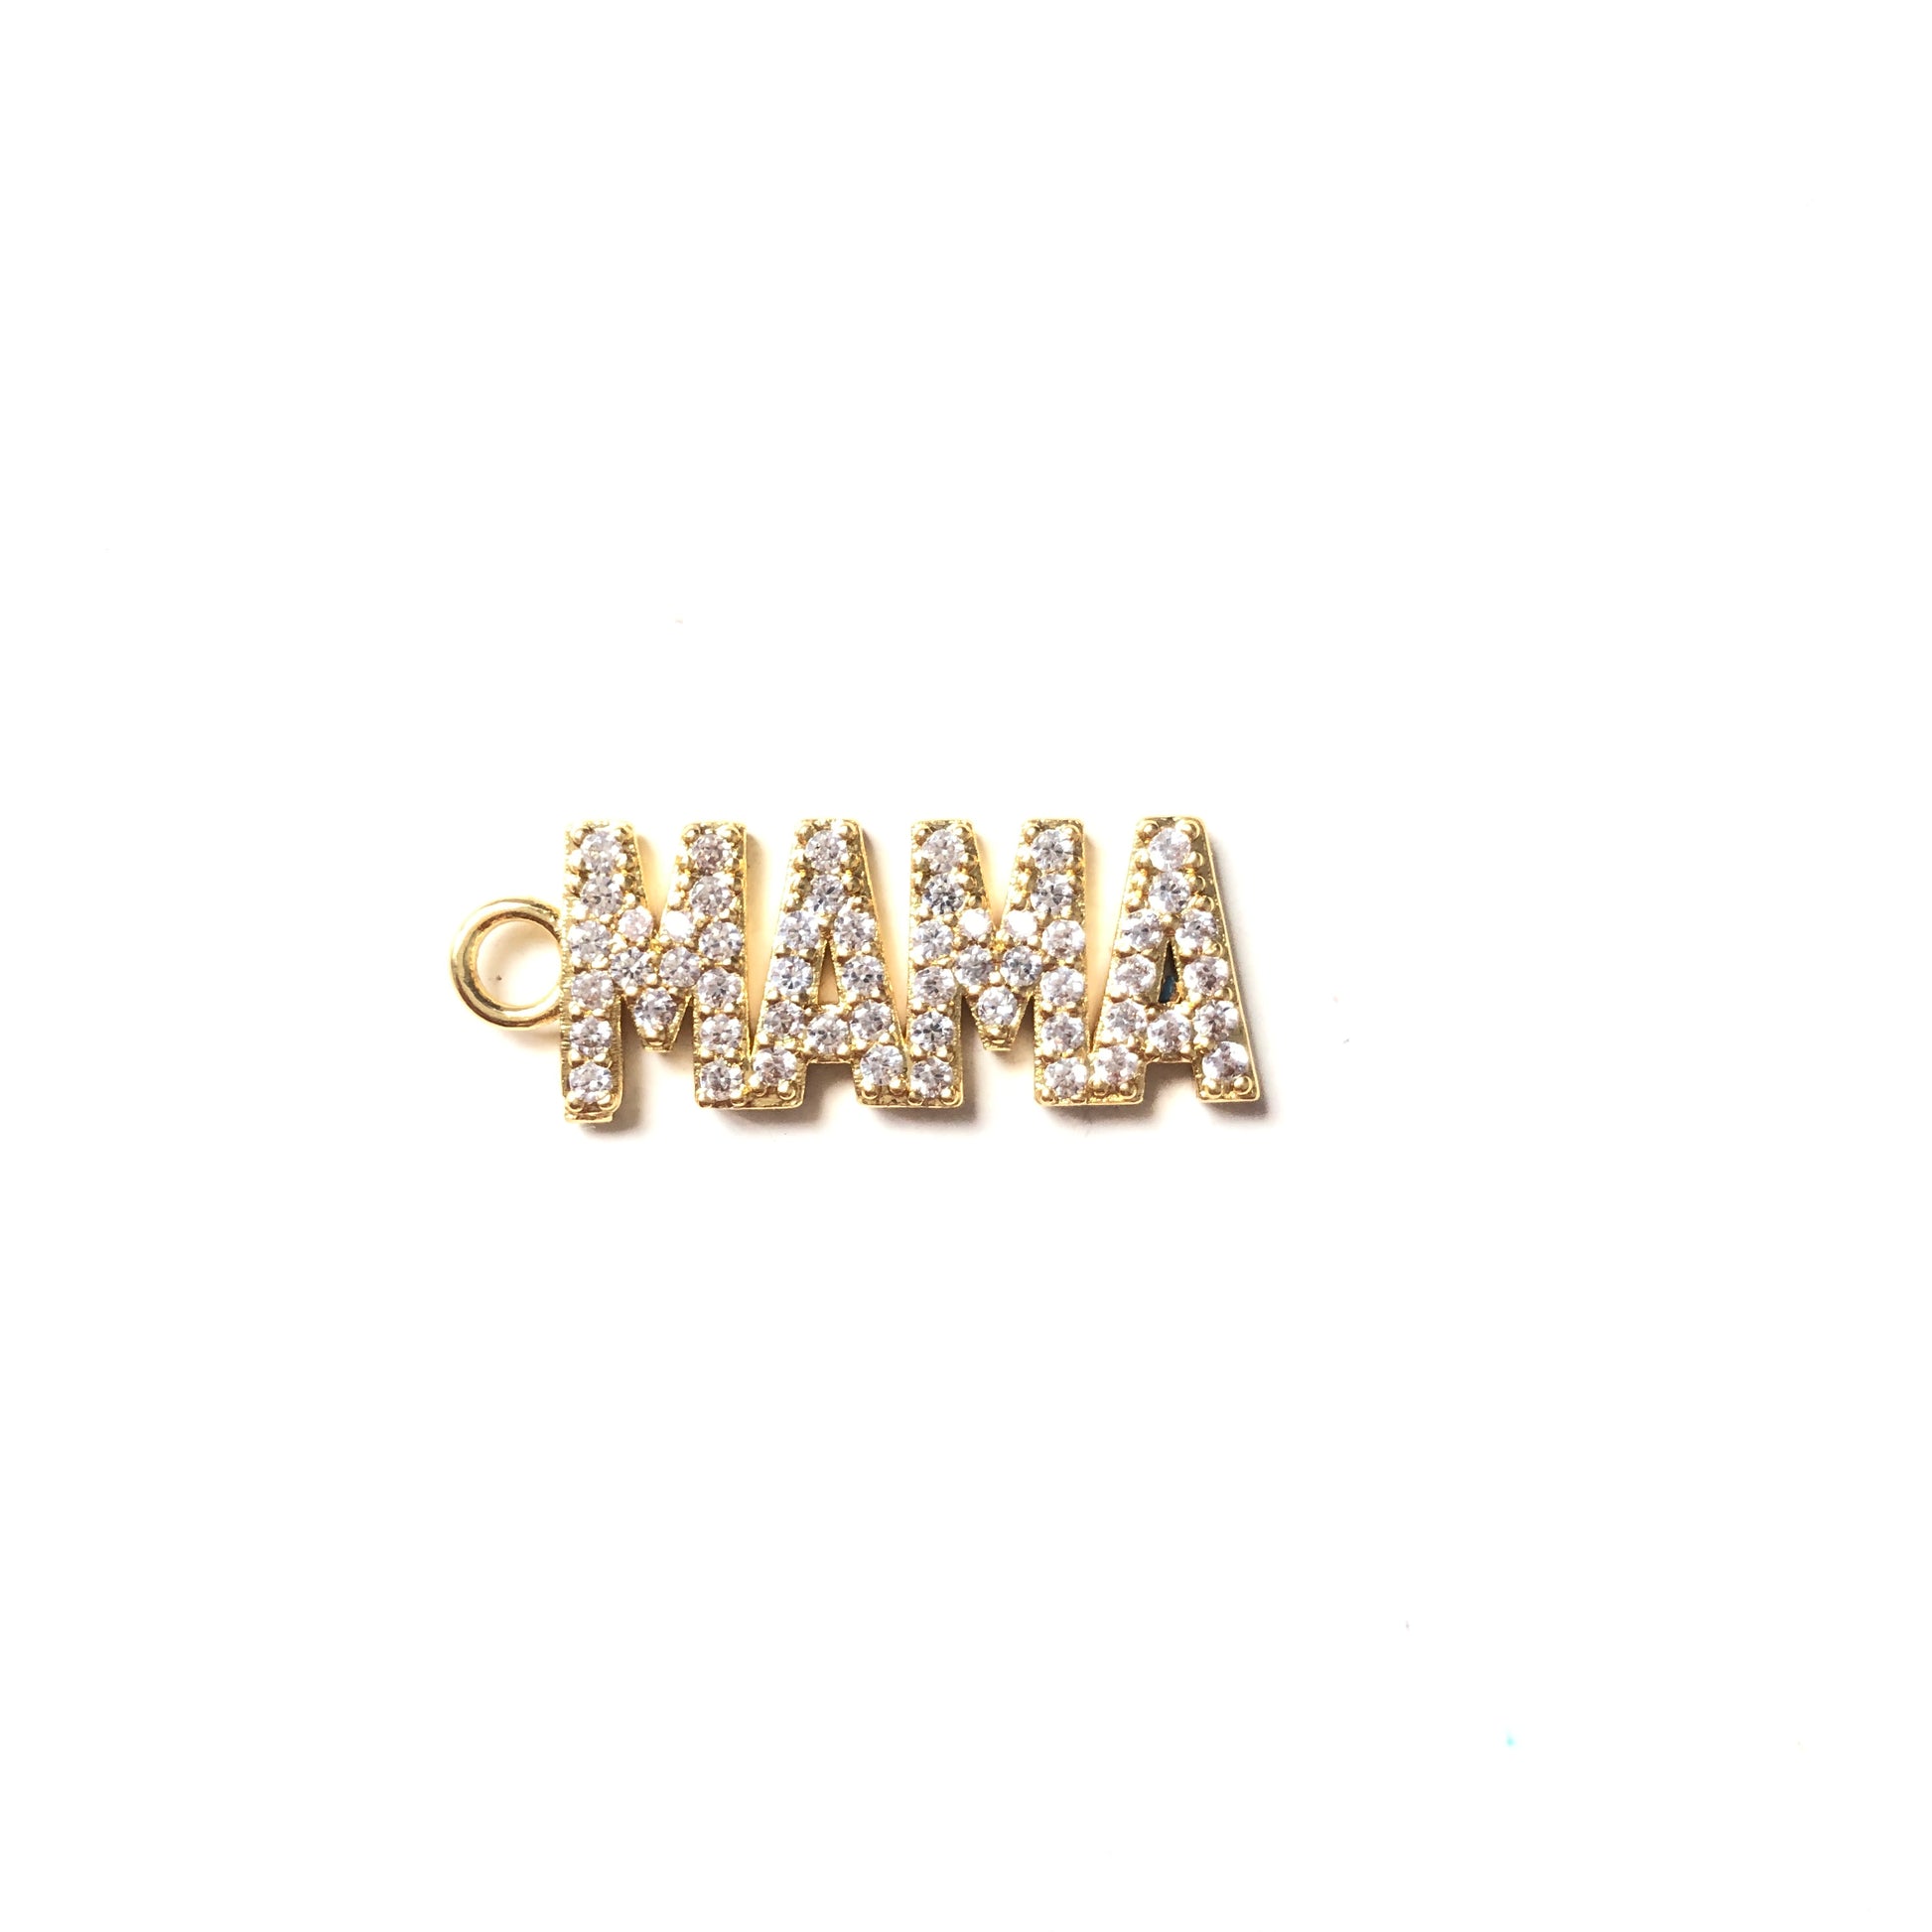 10pcs/lot Gold CZ Paved Letter Charms MAMA-10pc CZ Paved Charms Love Letters Mother's Day Words & Quotes Charms Beads Beyond